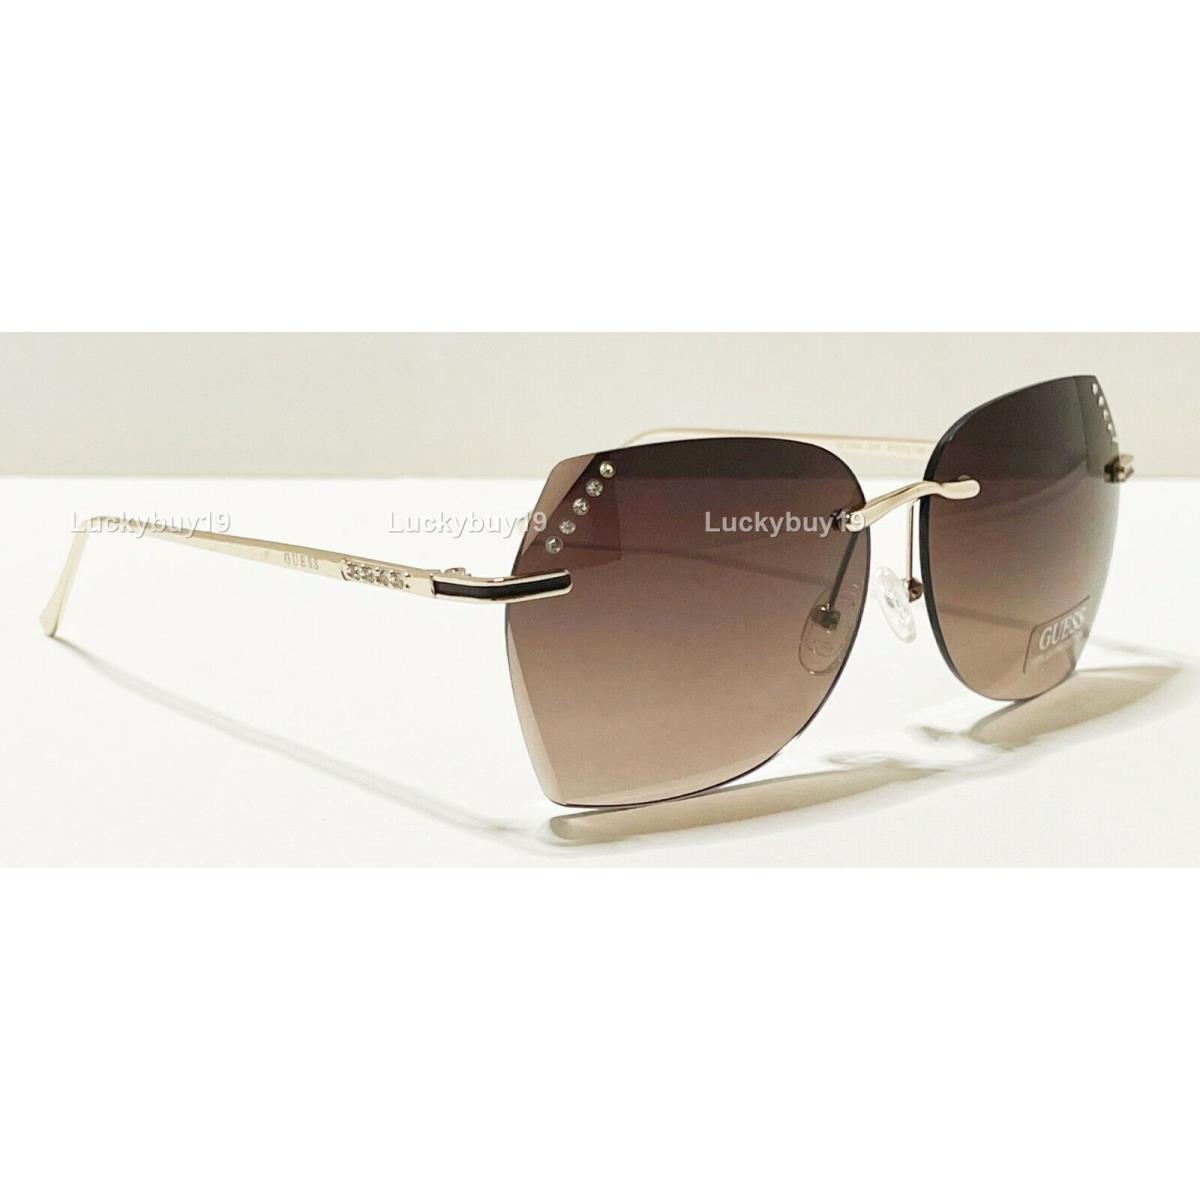 Guess sunglasses  - Gold Frame, Brown Lens 3